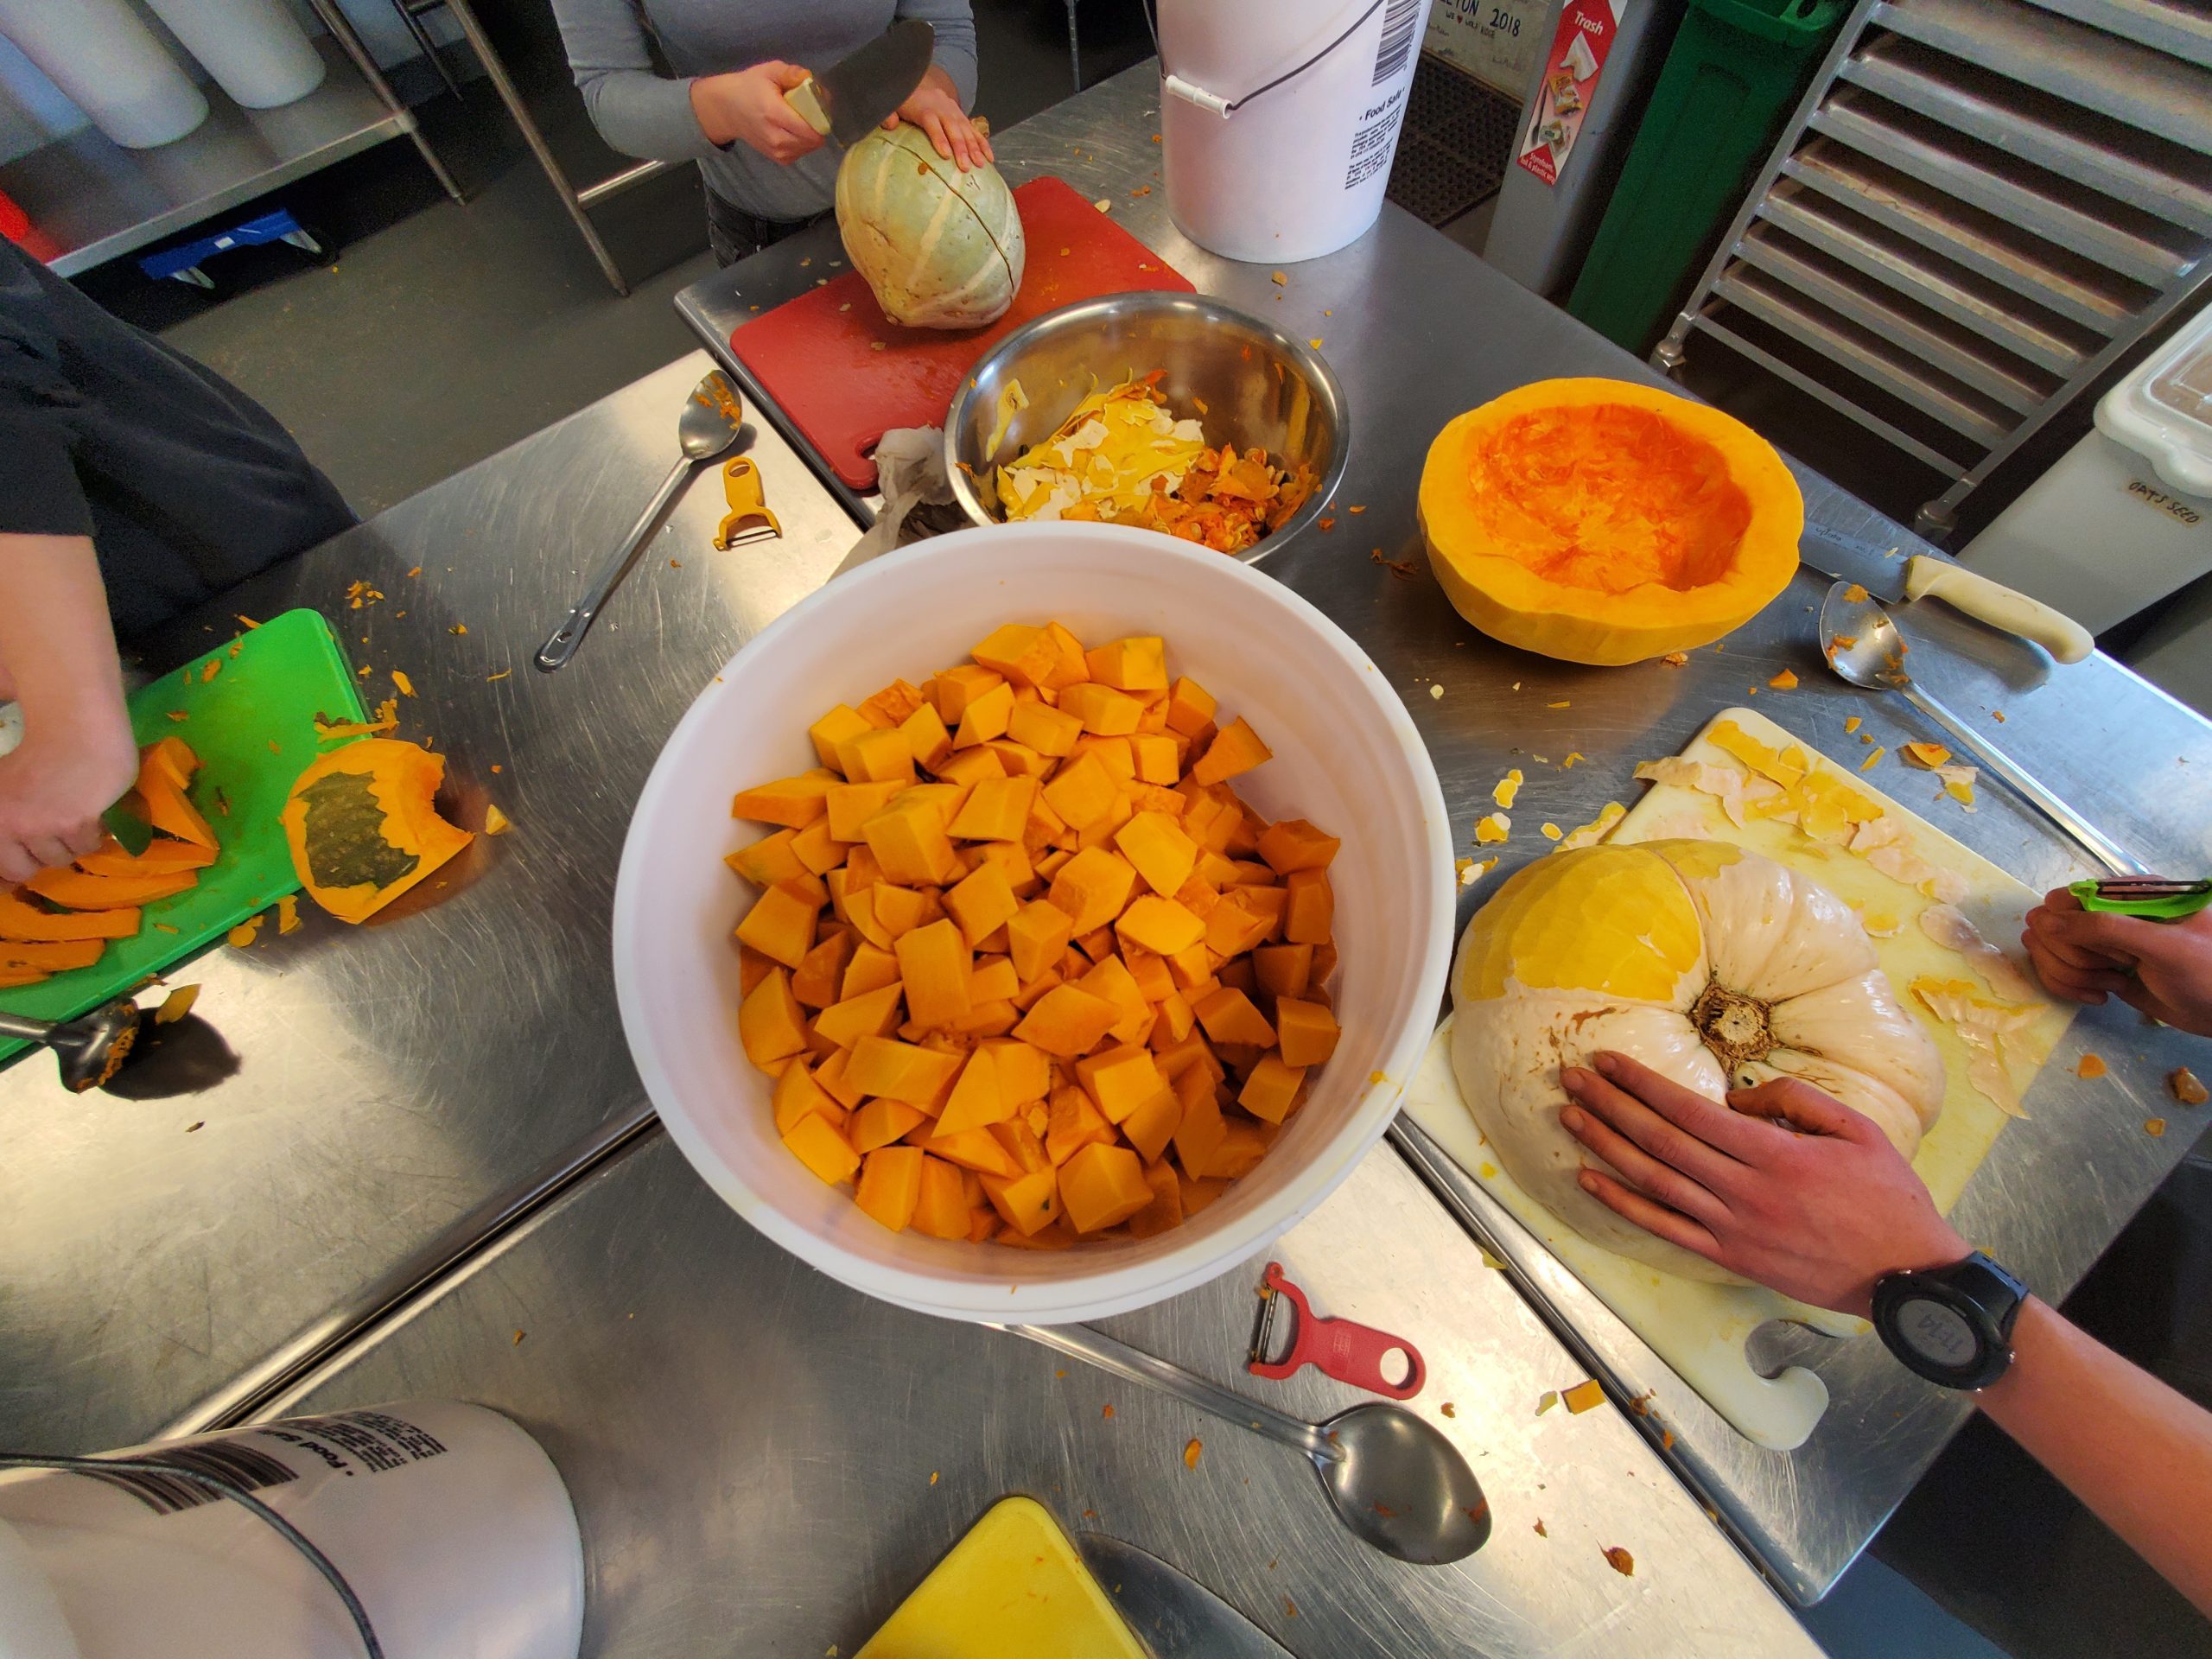 A bucket of squash is surrounded by students' hands and cutting boards